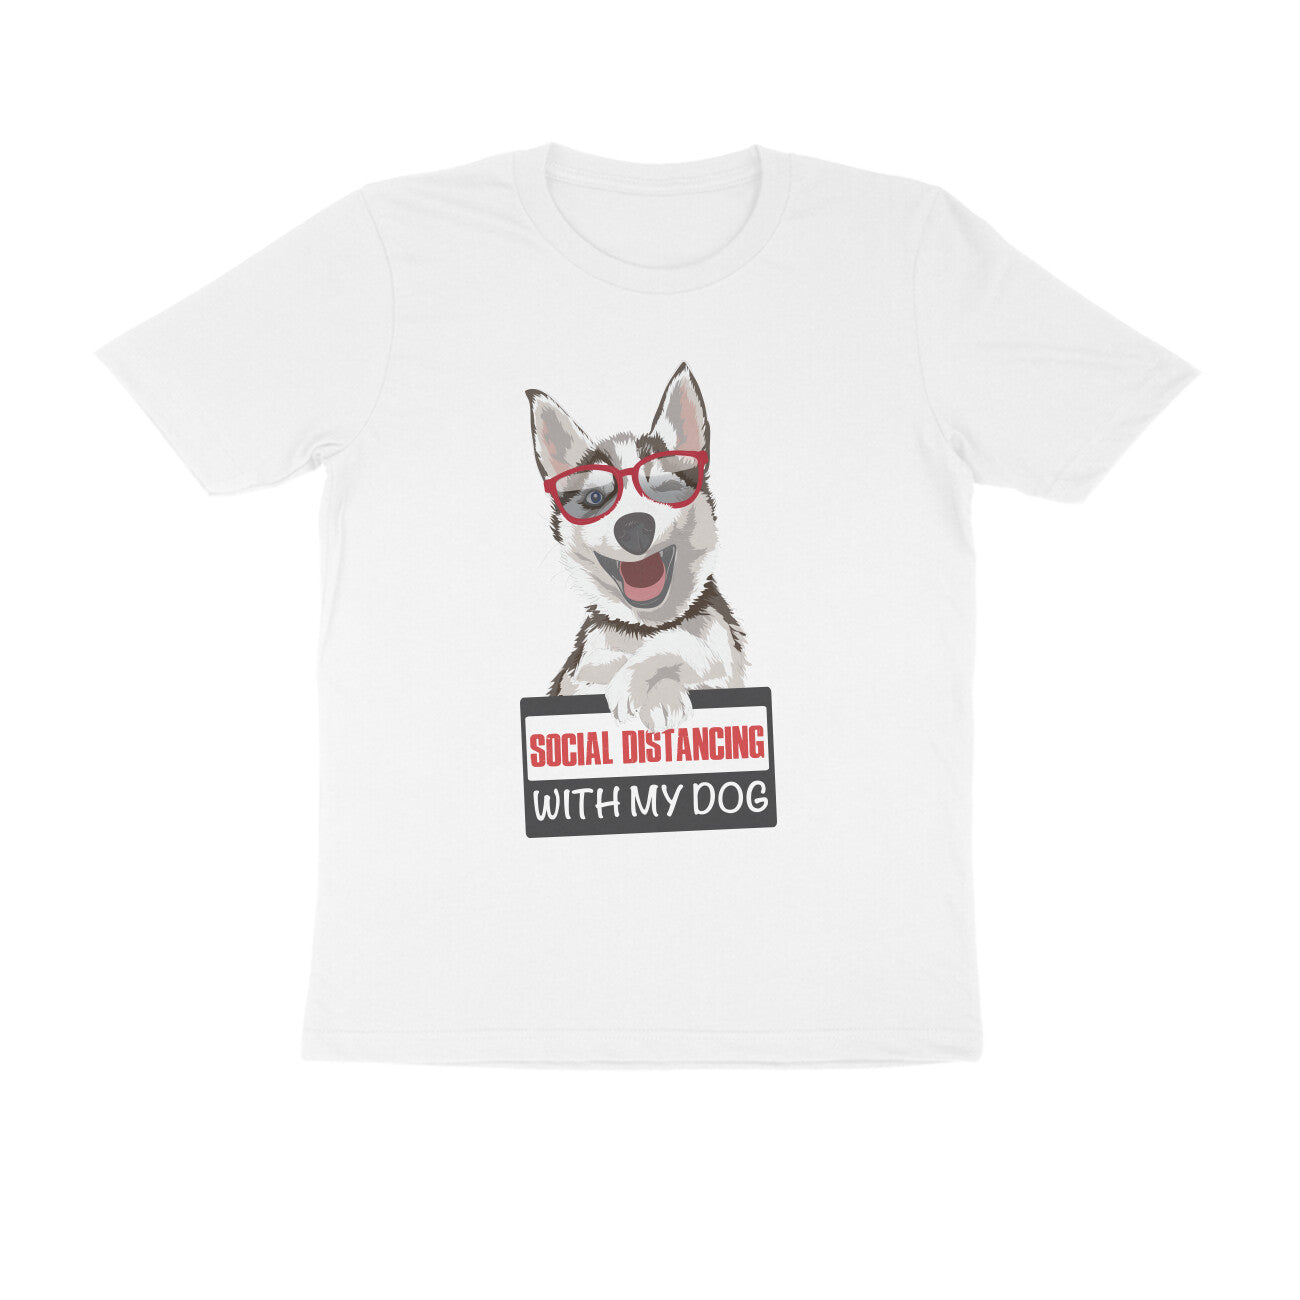 Social Distancing with my Dog Printed T-Shirt